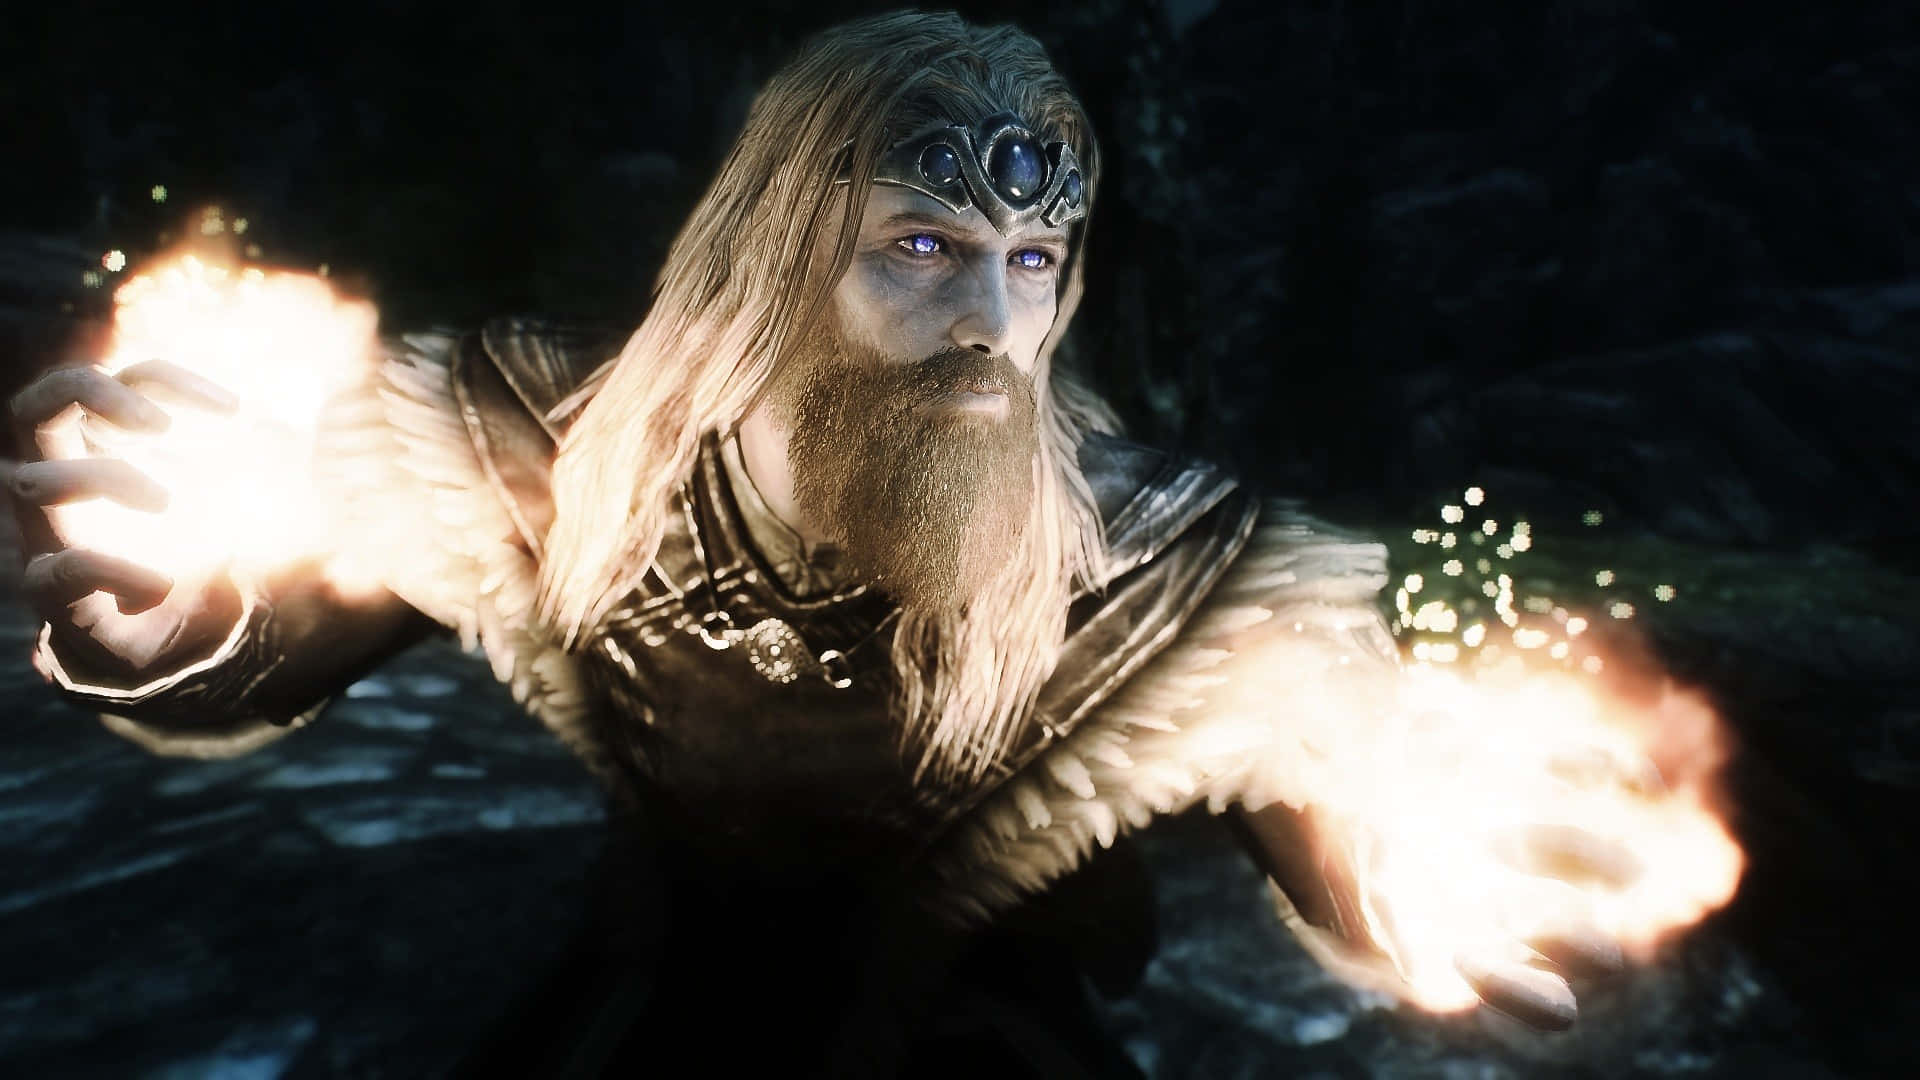 Powerful Skyrim Mage casting a spell Wallpaper